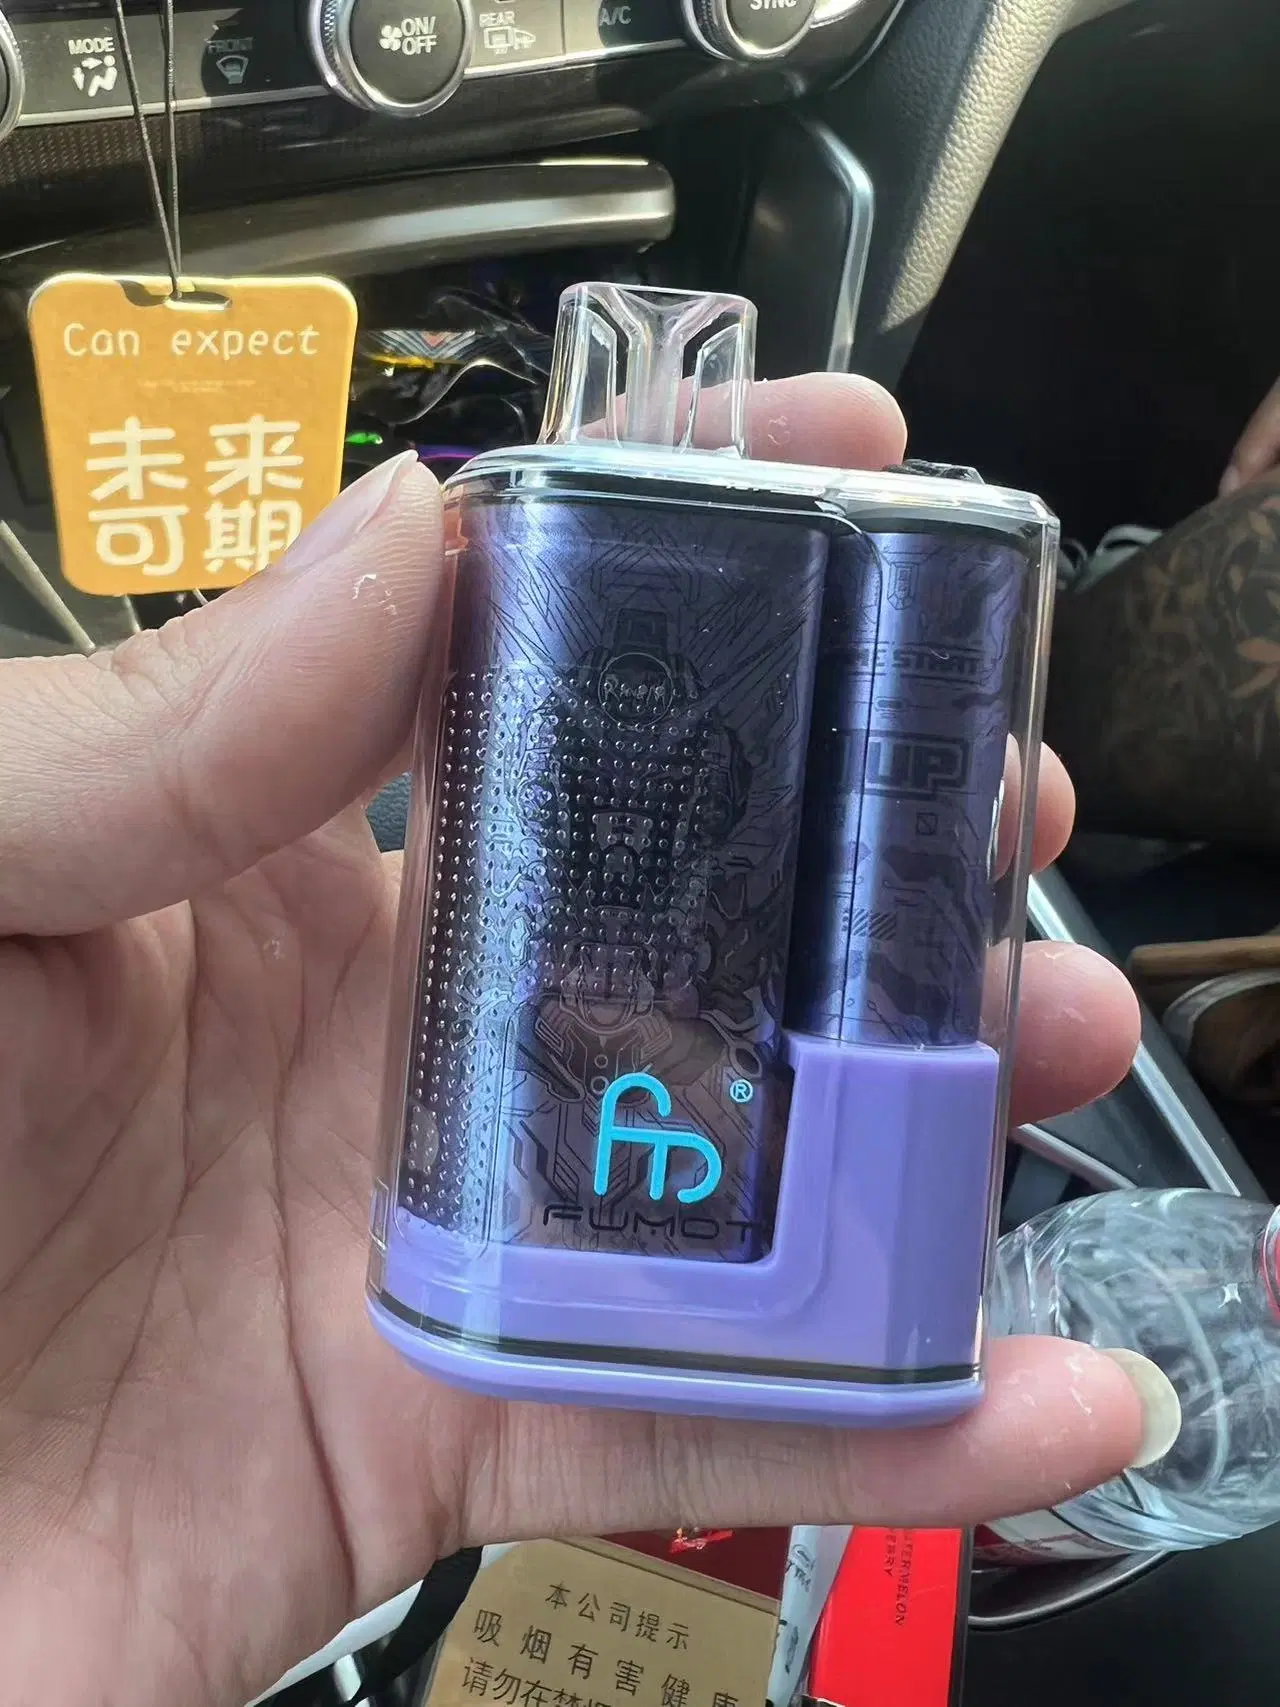 New Released Authentic Fumot Digital 12000 Vaporizer Design Waka 10000 Puffs Wholesale/Supplier I Vape Bc Drag Bar 5000 Disposable/Chargeable Pod Randm Bang 12000